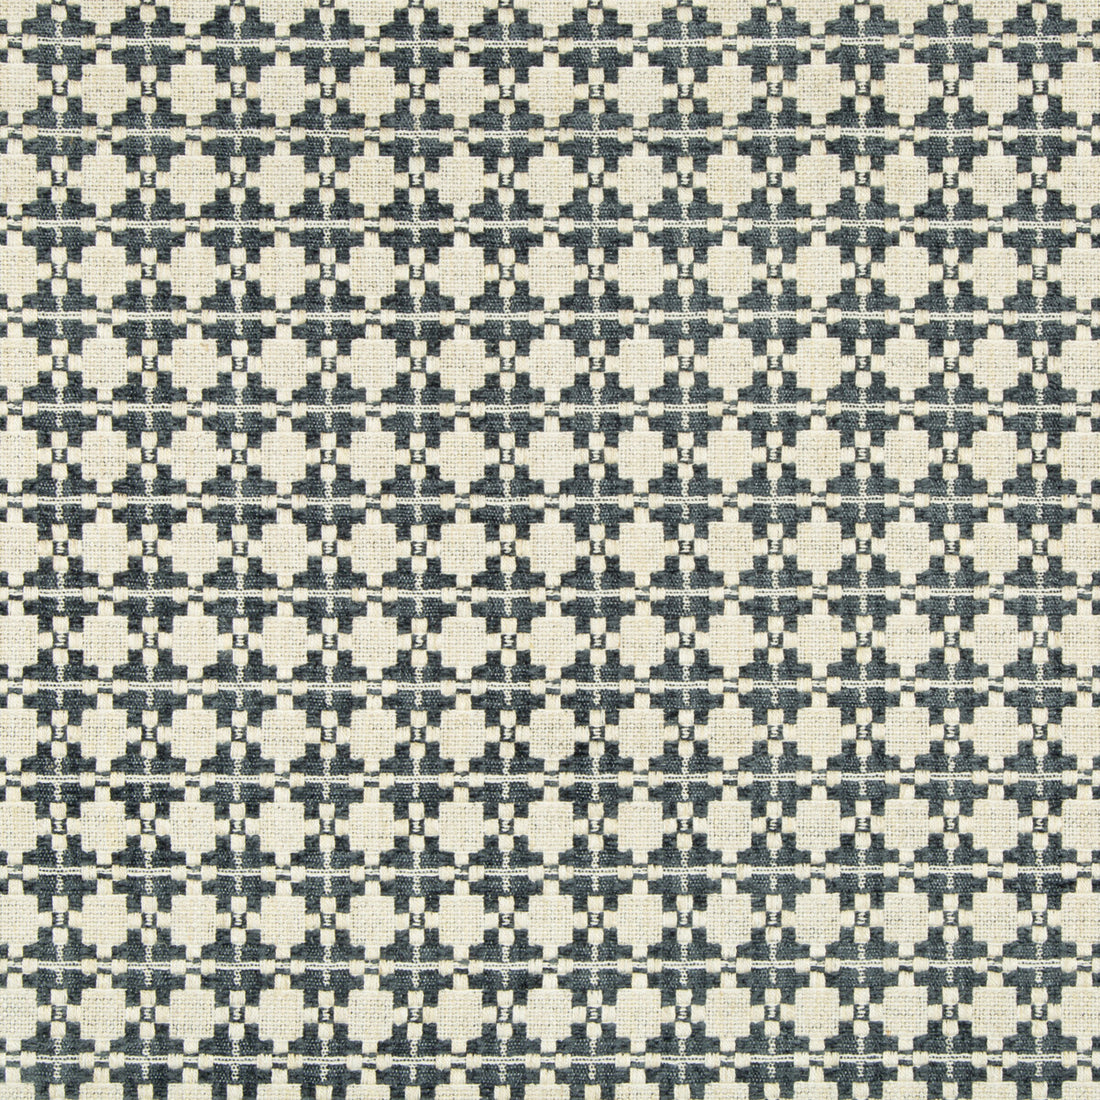 Back In Style fabric in steel color - pattern 34962.516.0 - by Kravet Couture in the Modern Tailor collection